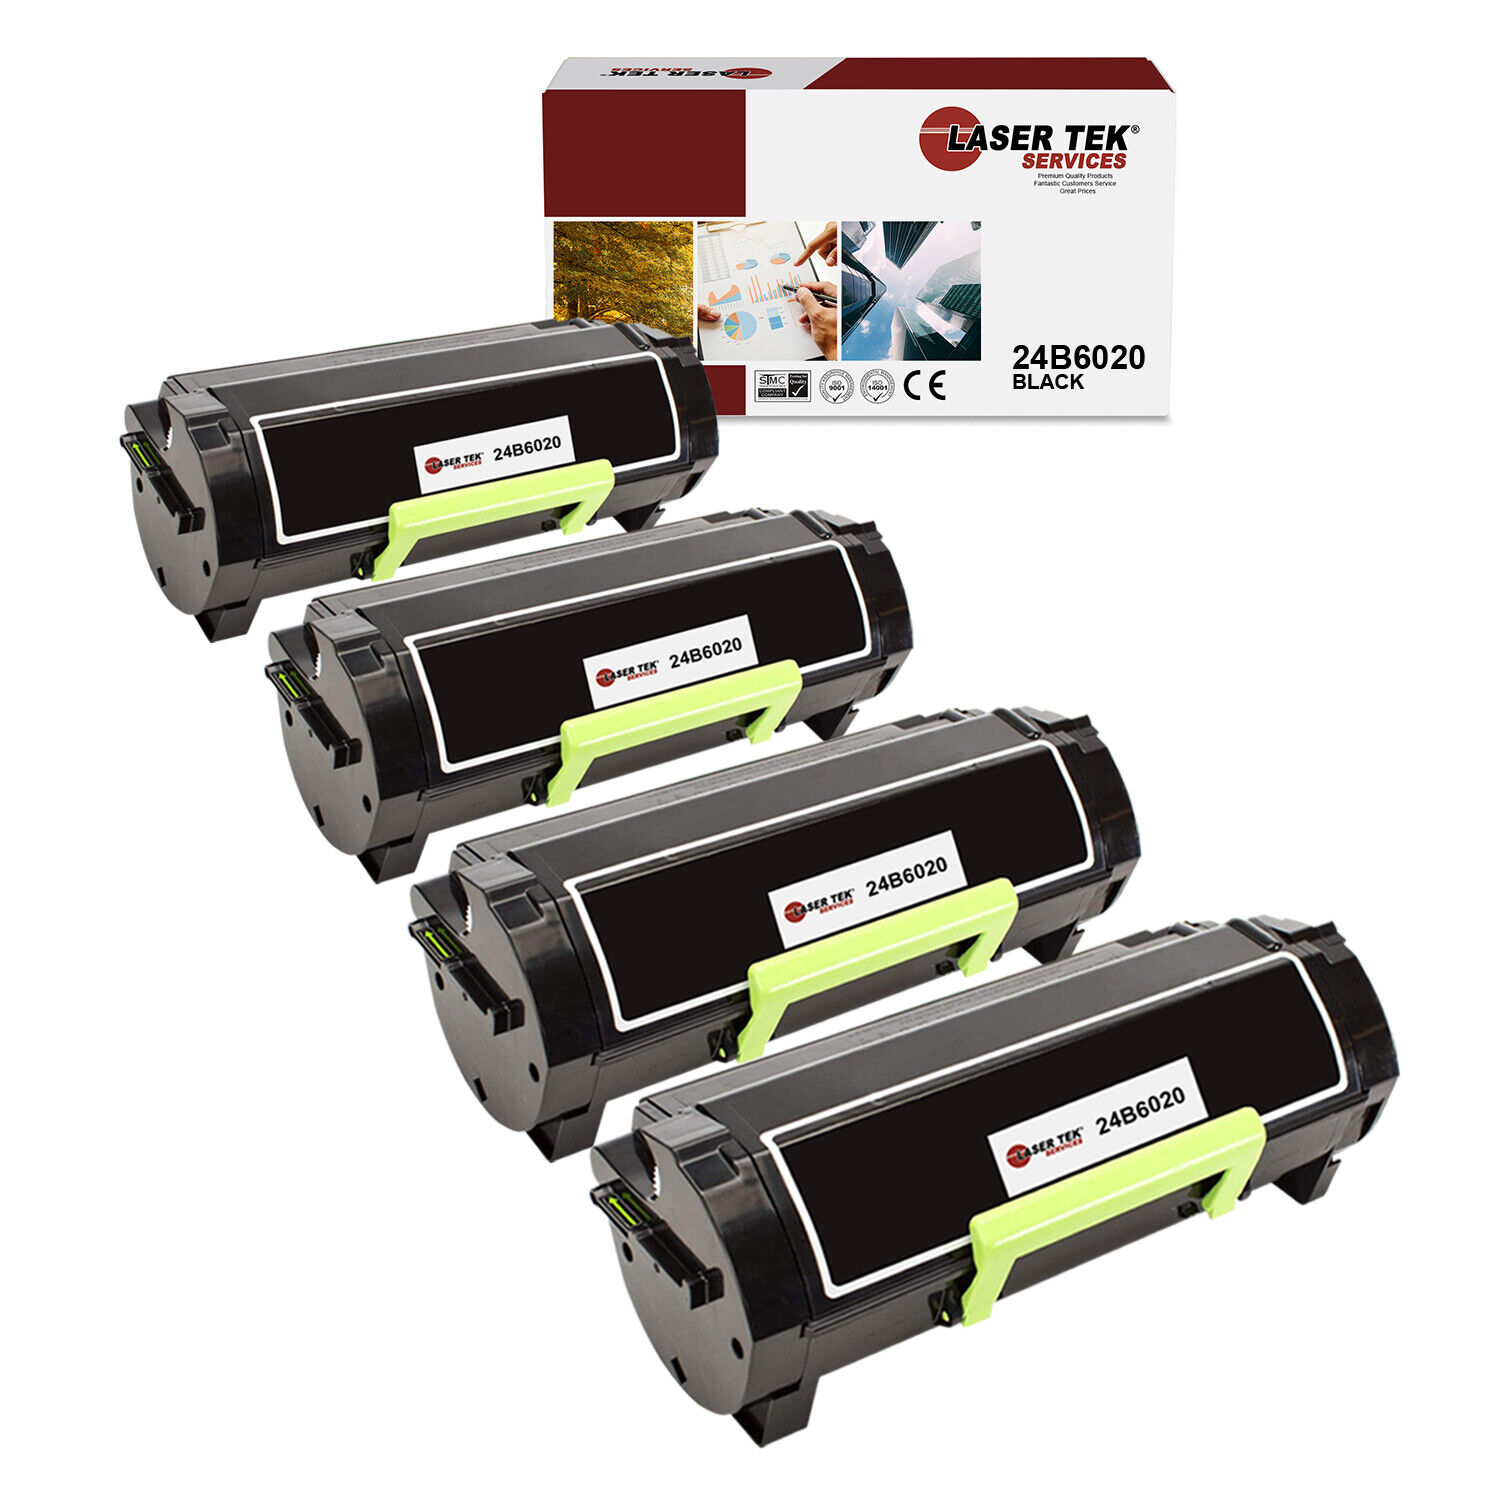 MSE Brand Remanufactured MICR Toner Cartridge Replacement for HP C4129X | Black